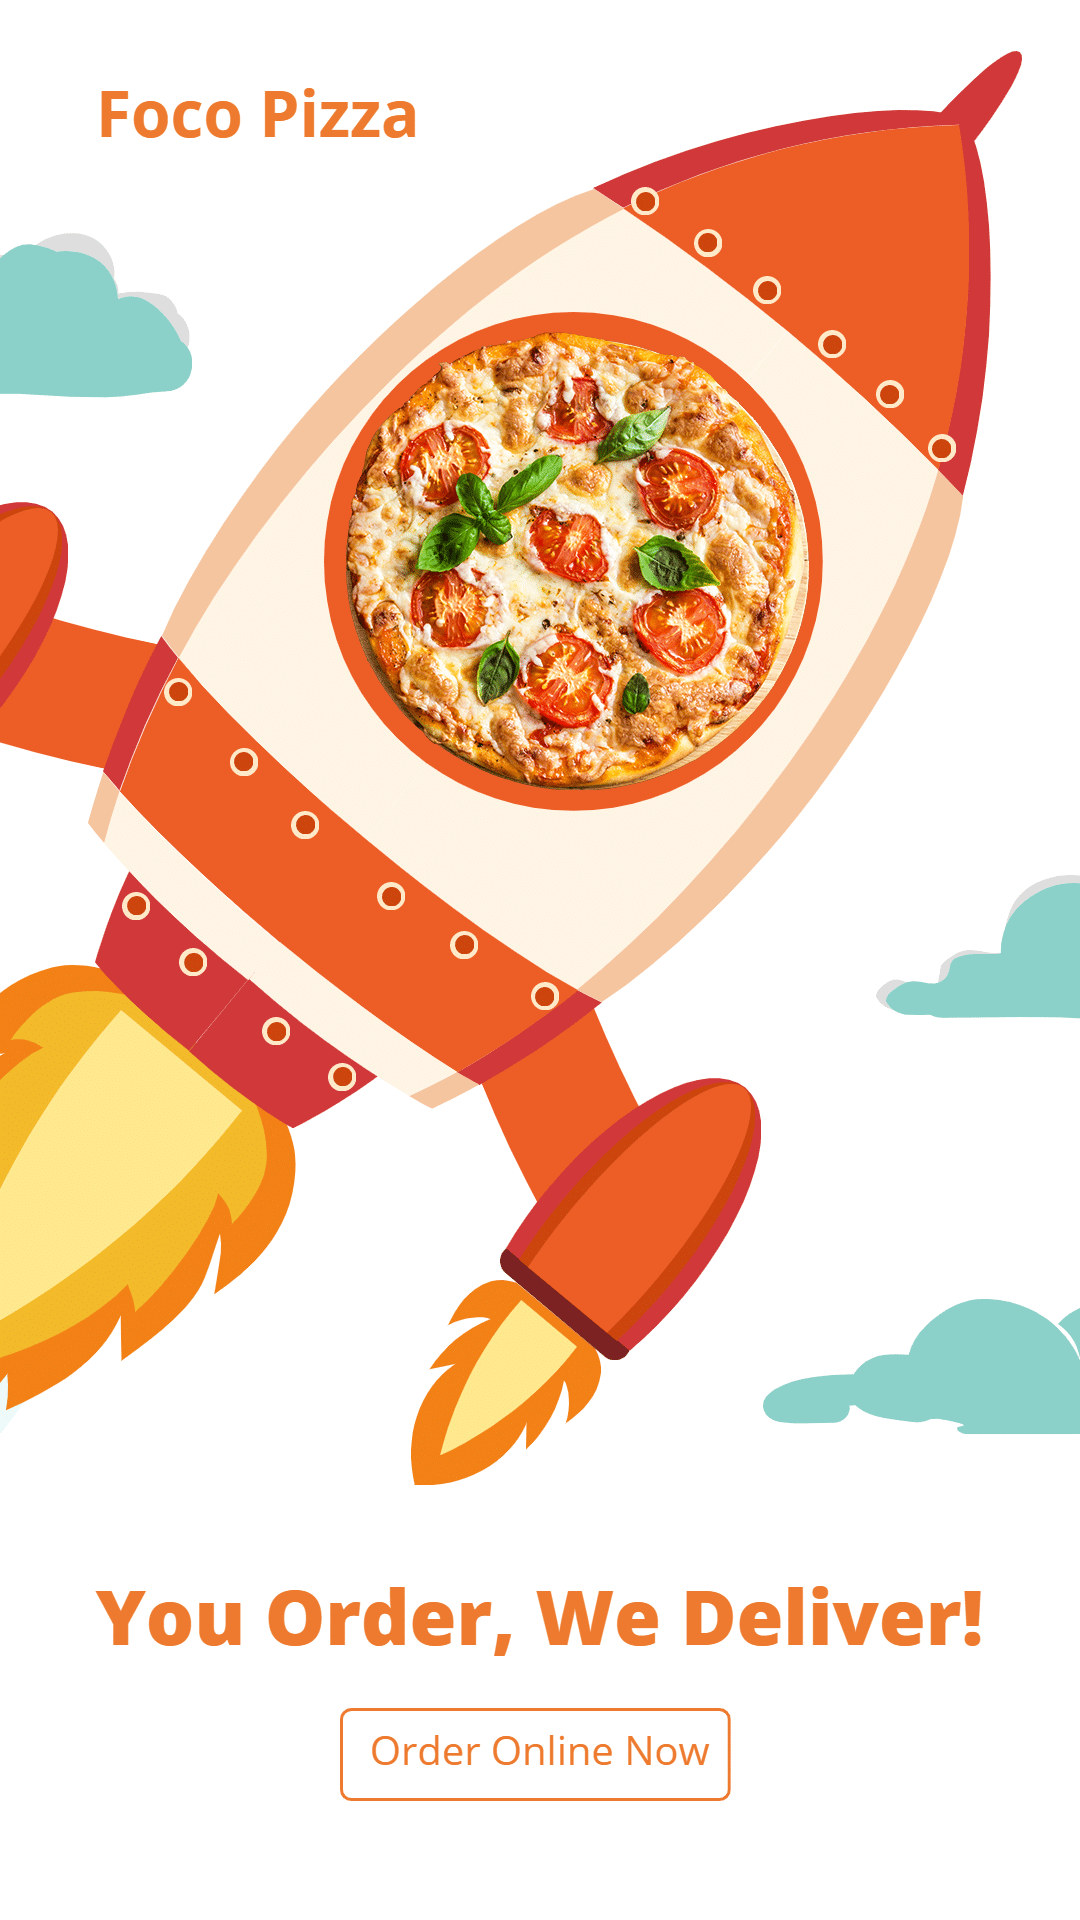 Creative Pizza Delivery Services Ecommerce Story预览效果